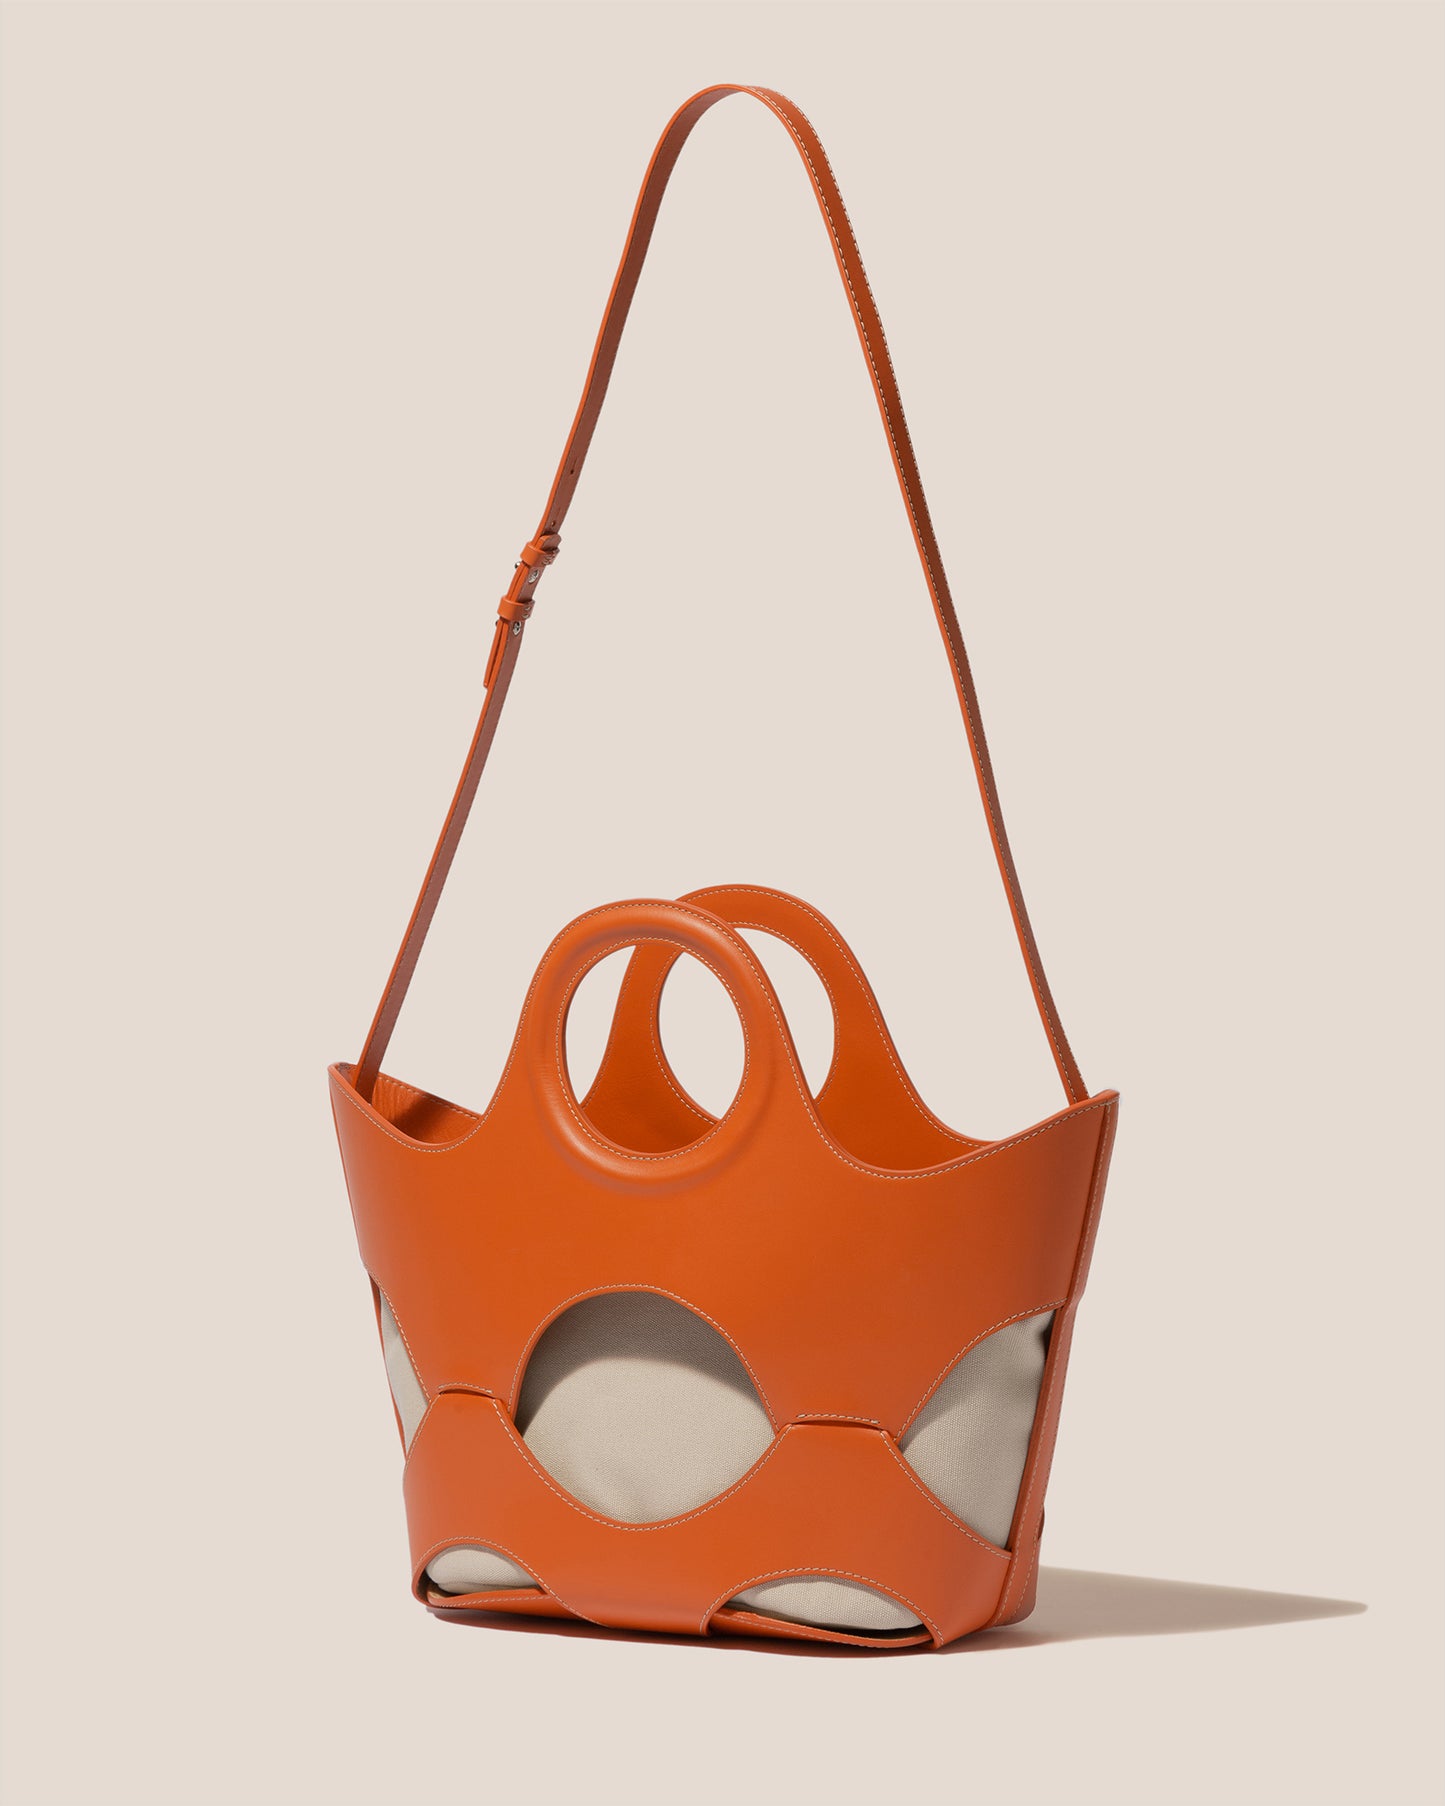 ONADA - Cut-out Leather Tote Bag